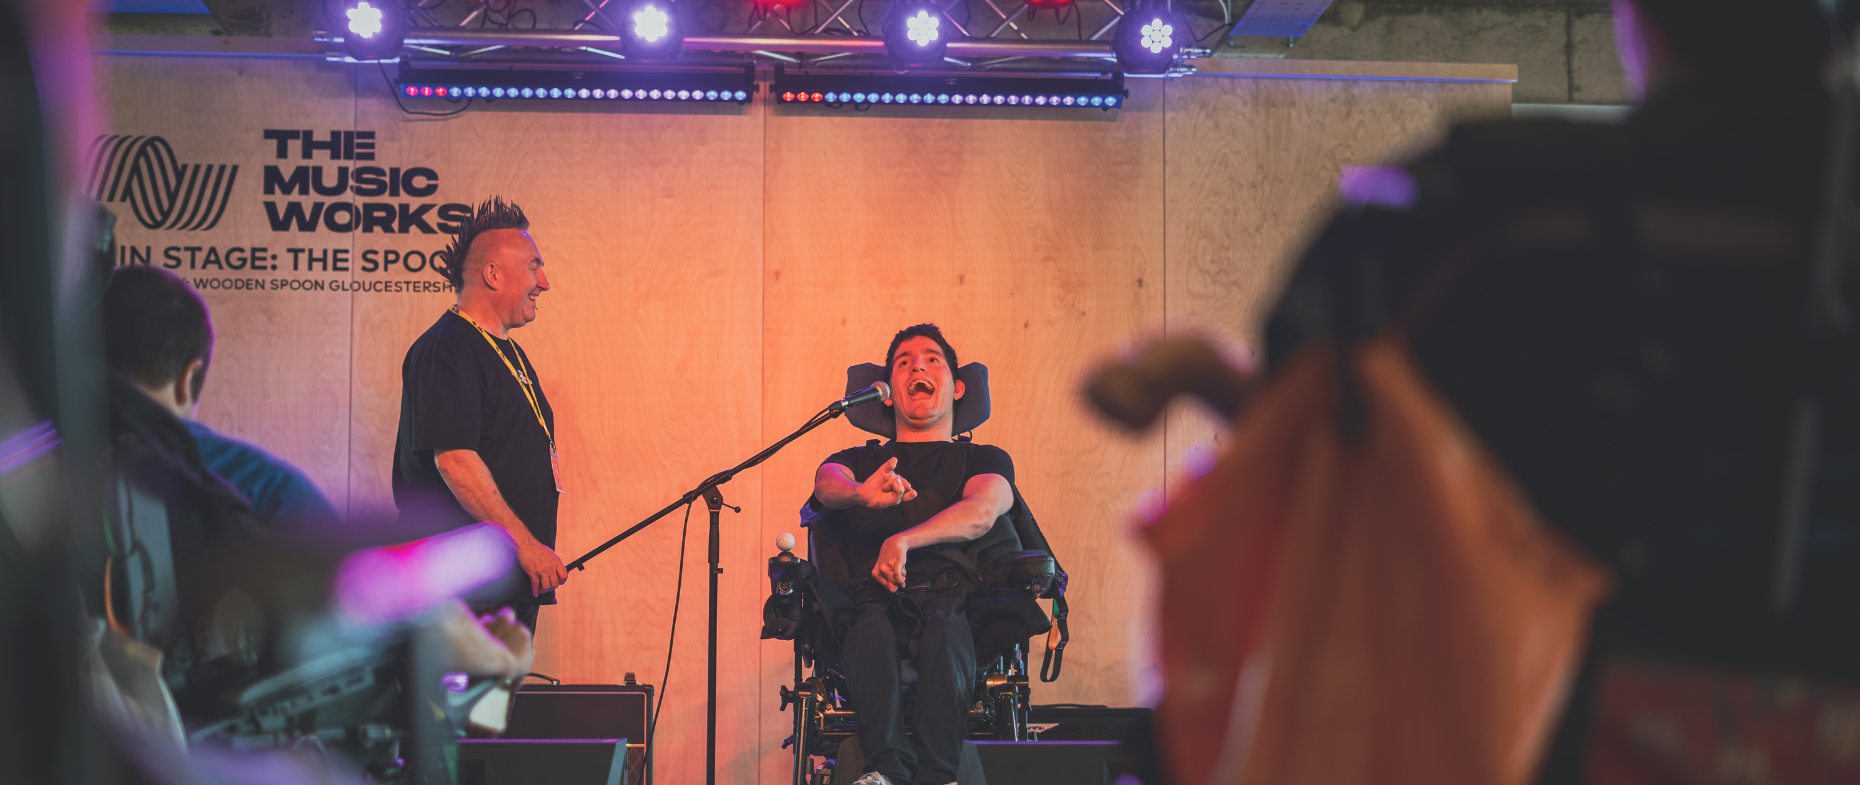 The Music Works' disability lead Lee Holder on stage with a young disabled performer singing.